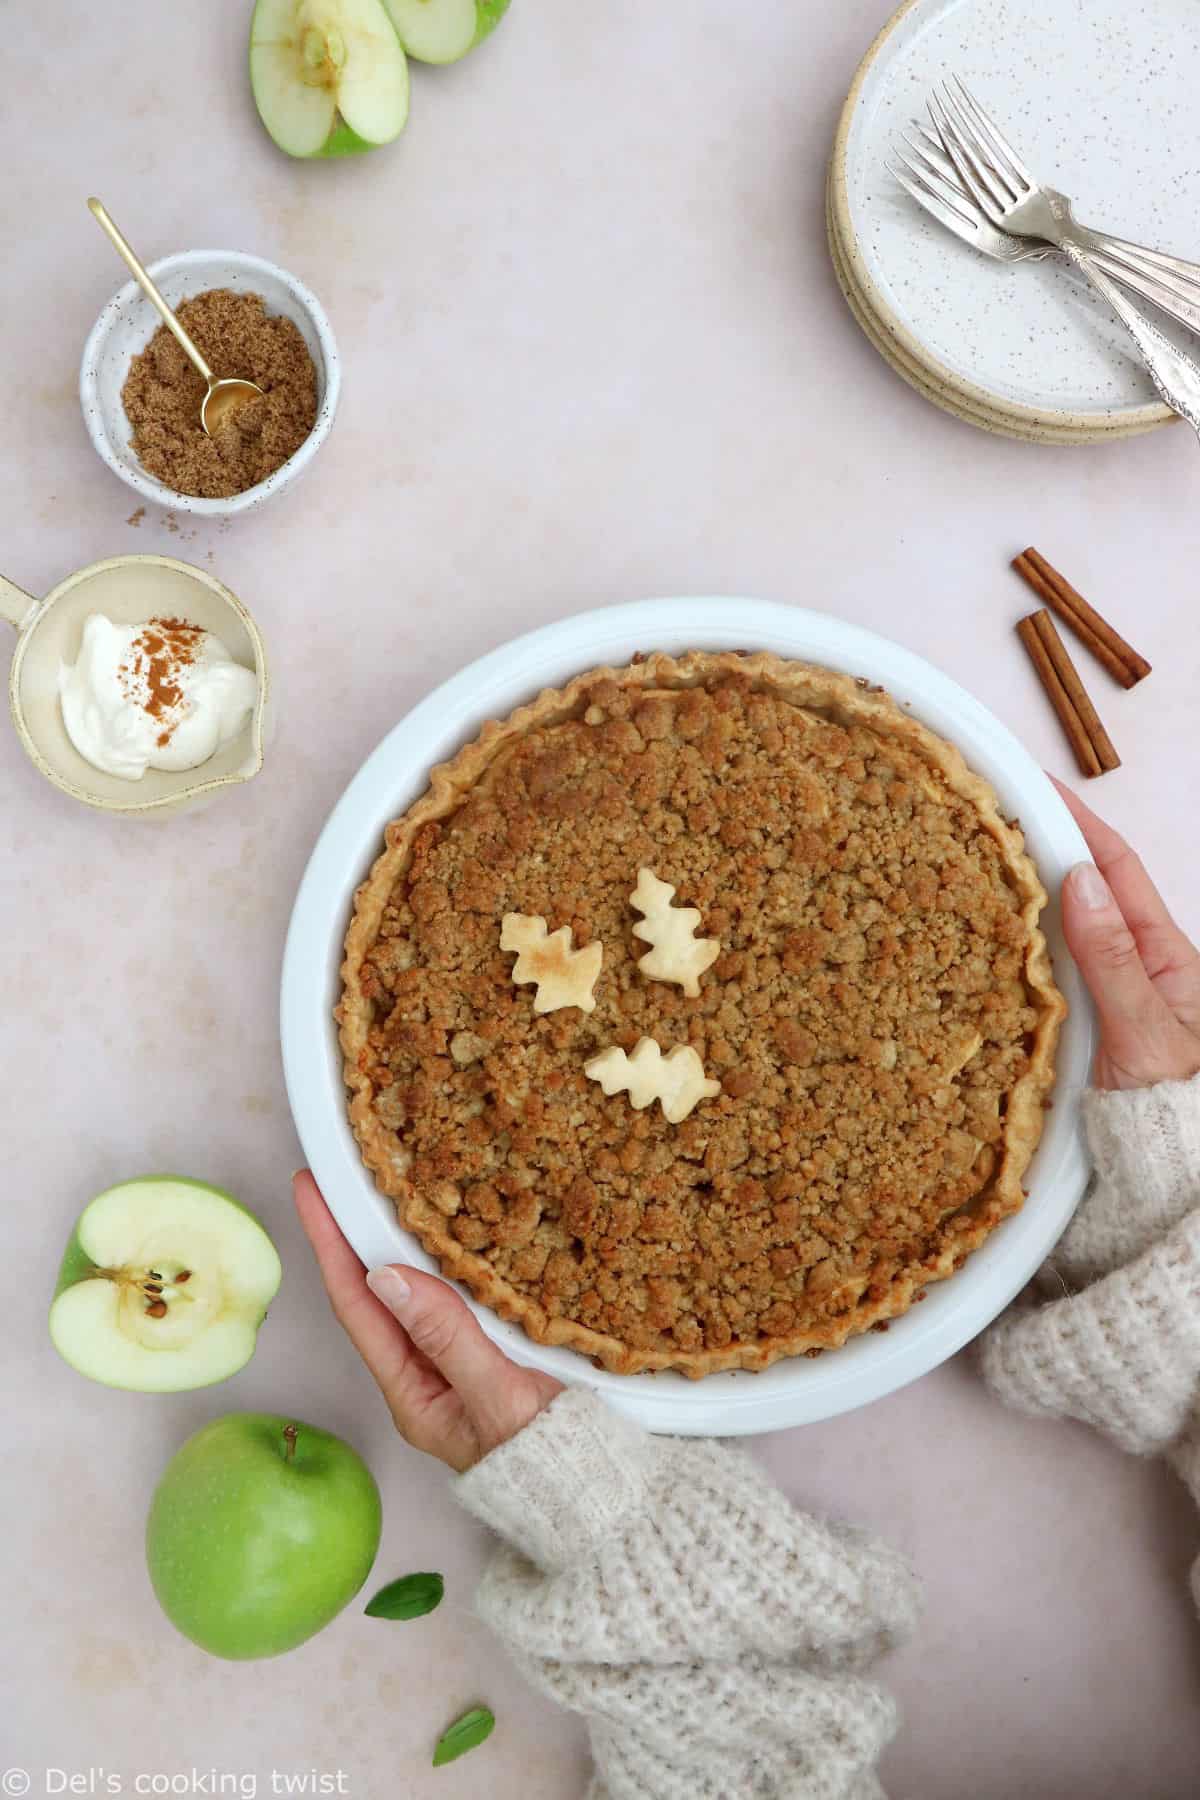 This Chai Spiced Dutch Apple Pie has become one of my favorite apple recipe together with the Classic Apple Pie.